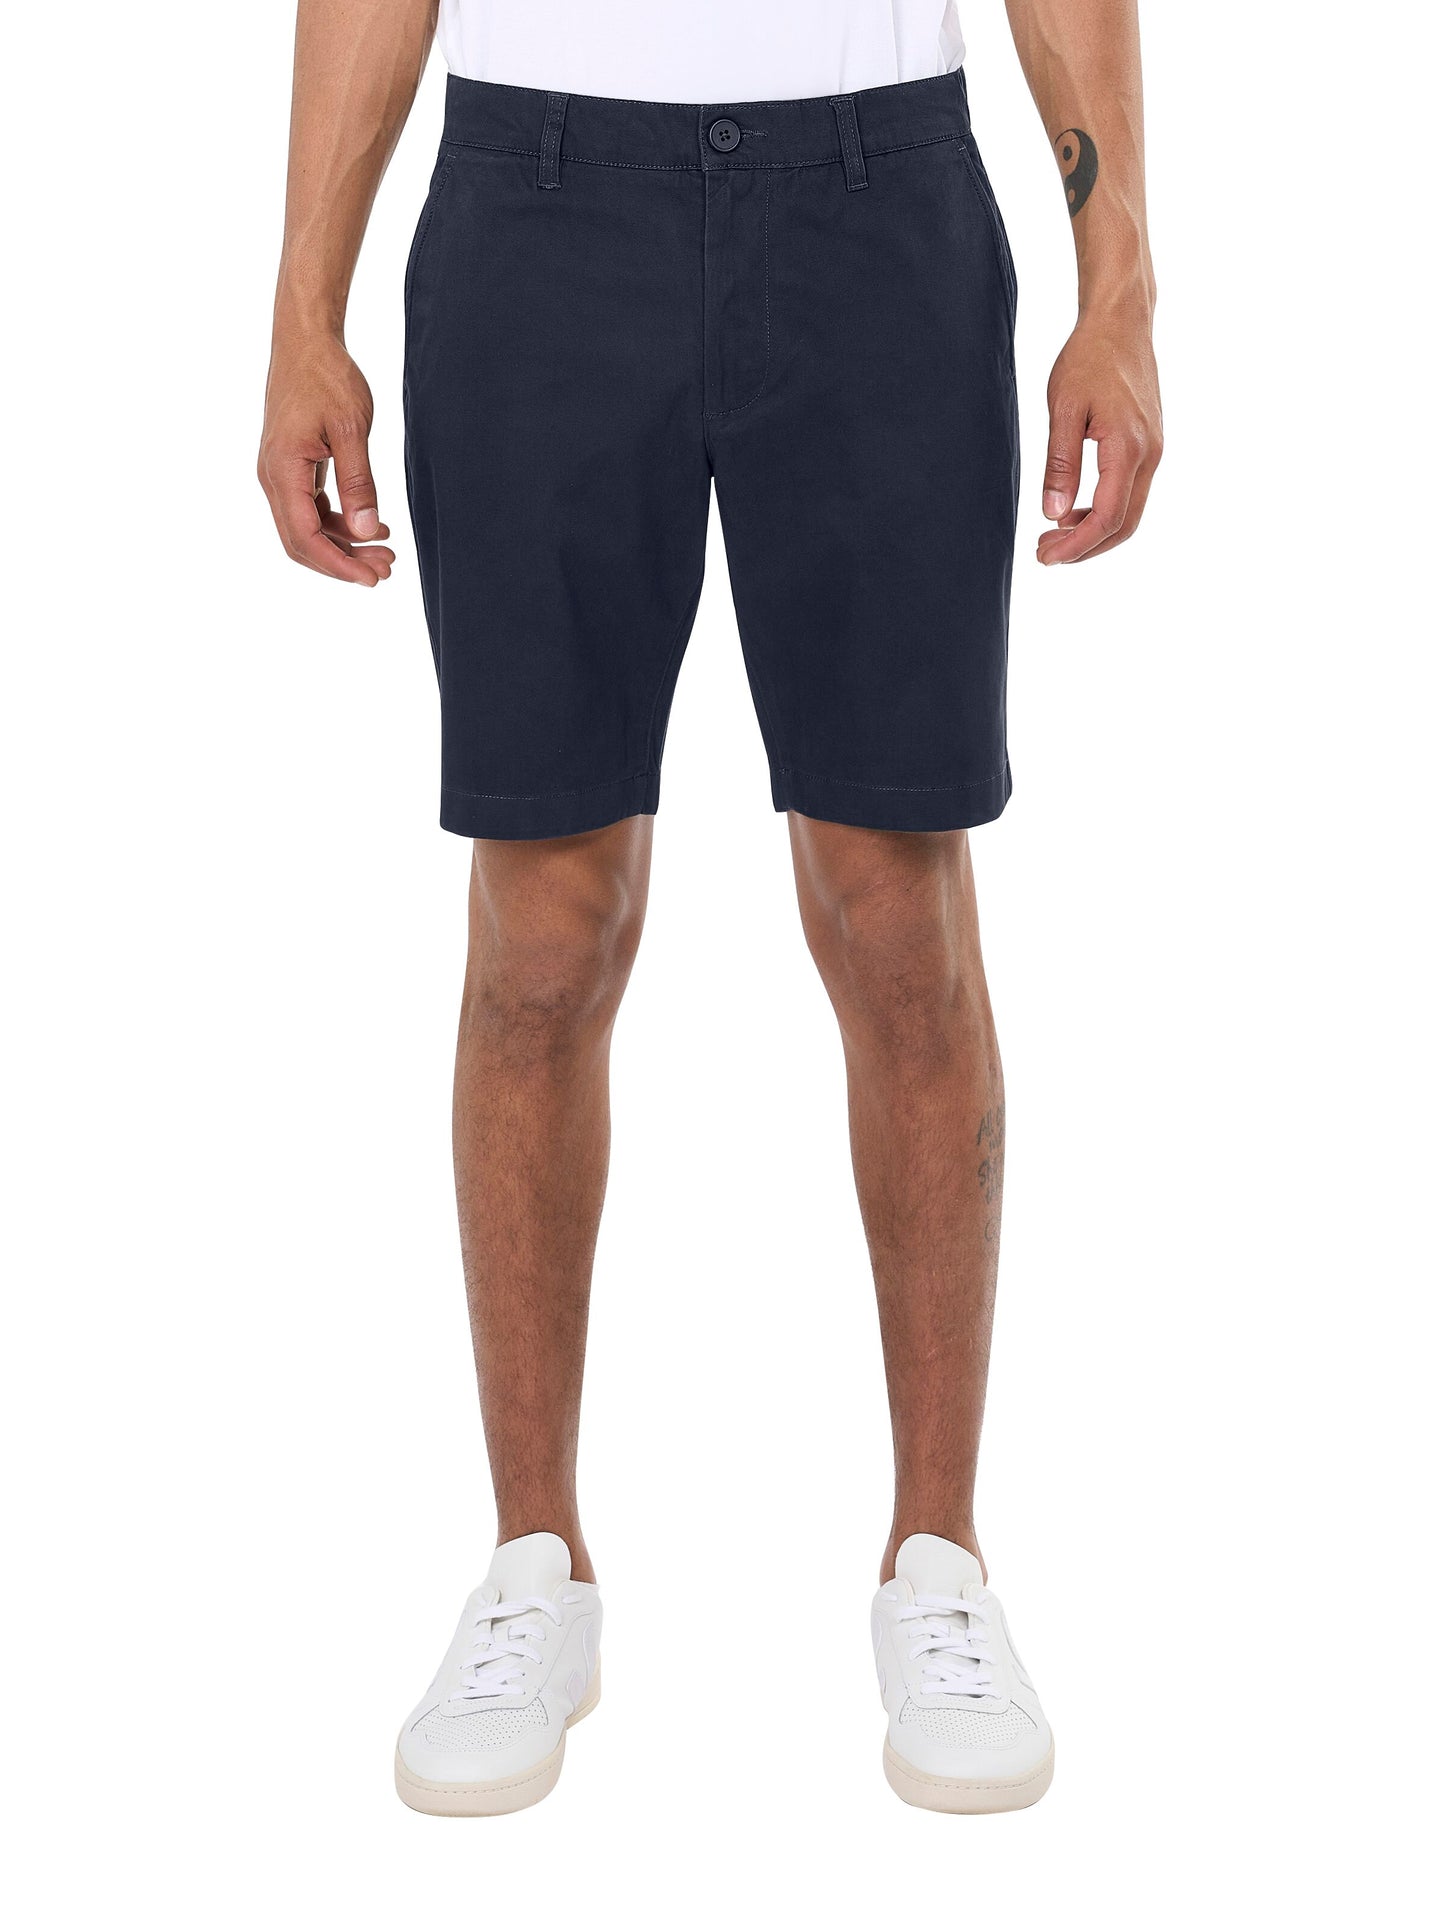 Stretched Twill Shorts - Total Eclipse - KnowledgeCotton Apparel